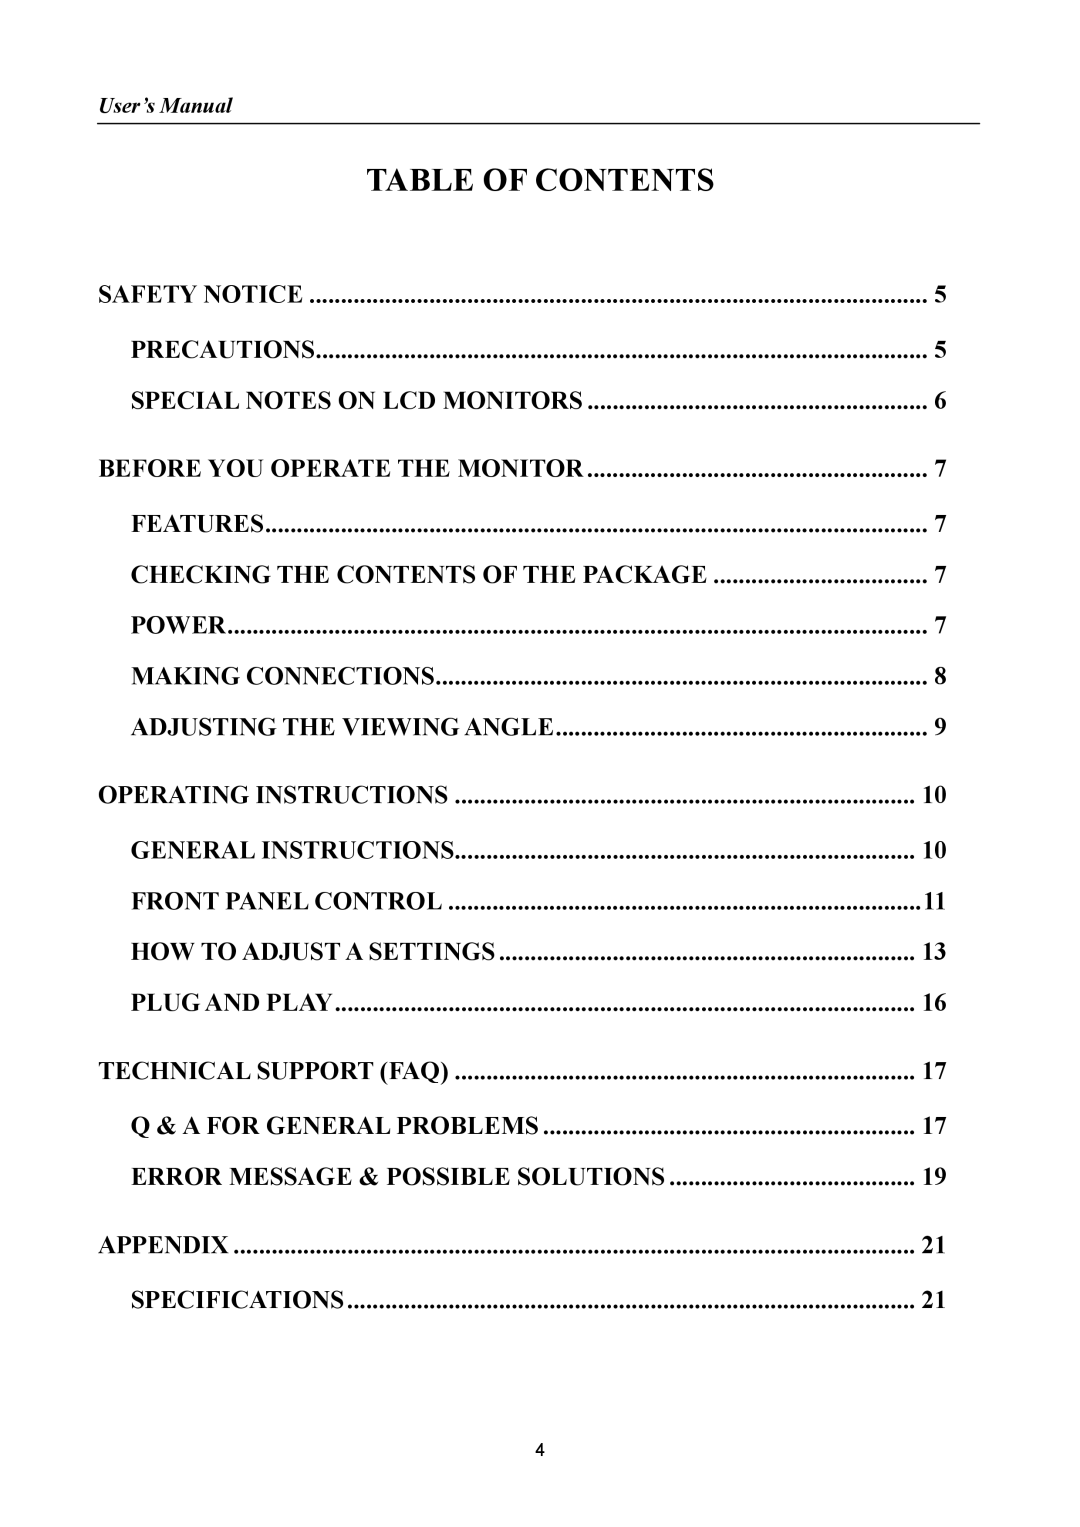 Hanns.G HH251 manual Table Of Contents, Error Message & Possible Solutions 